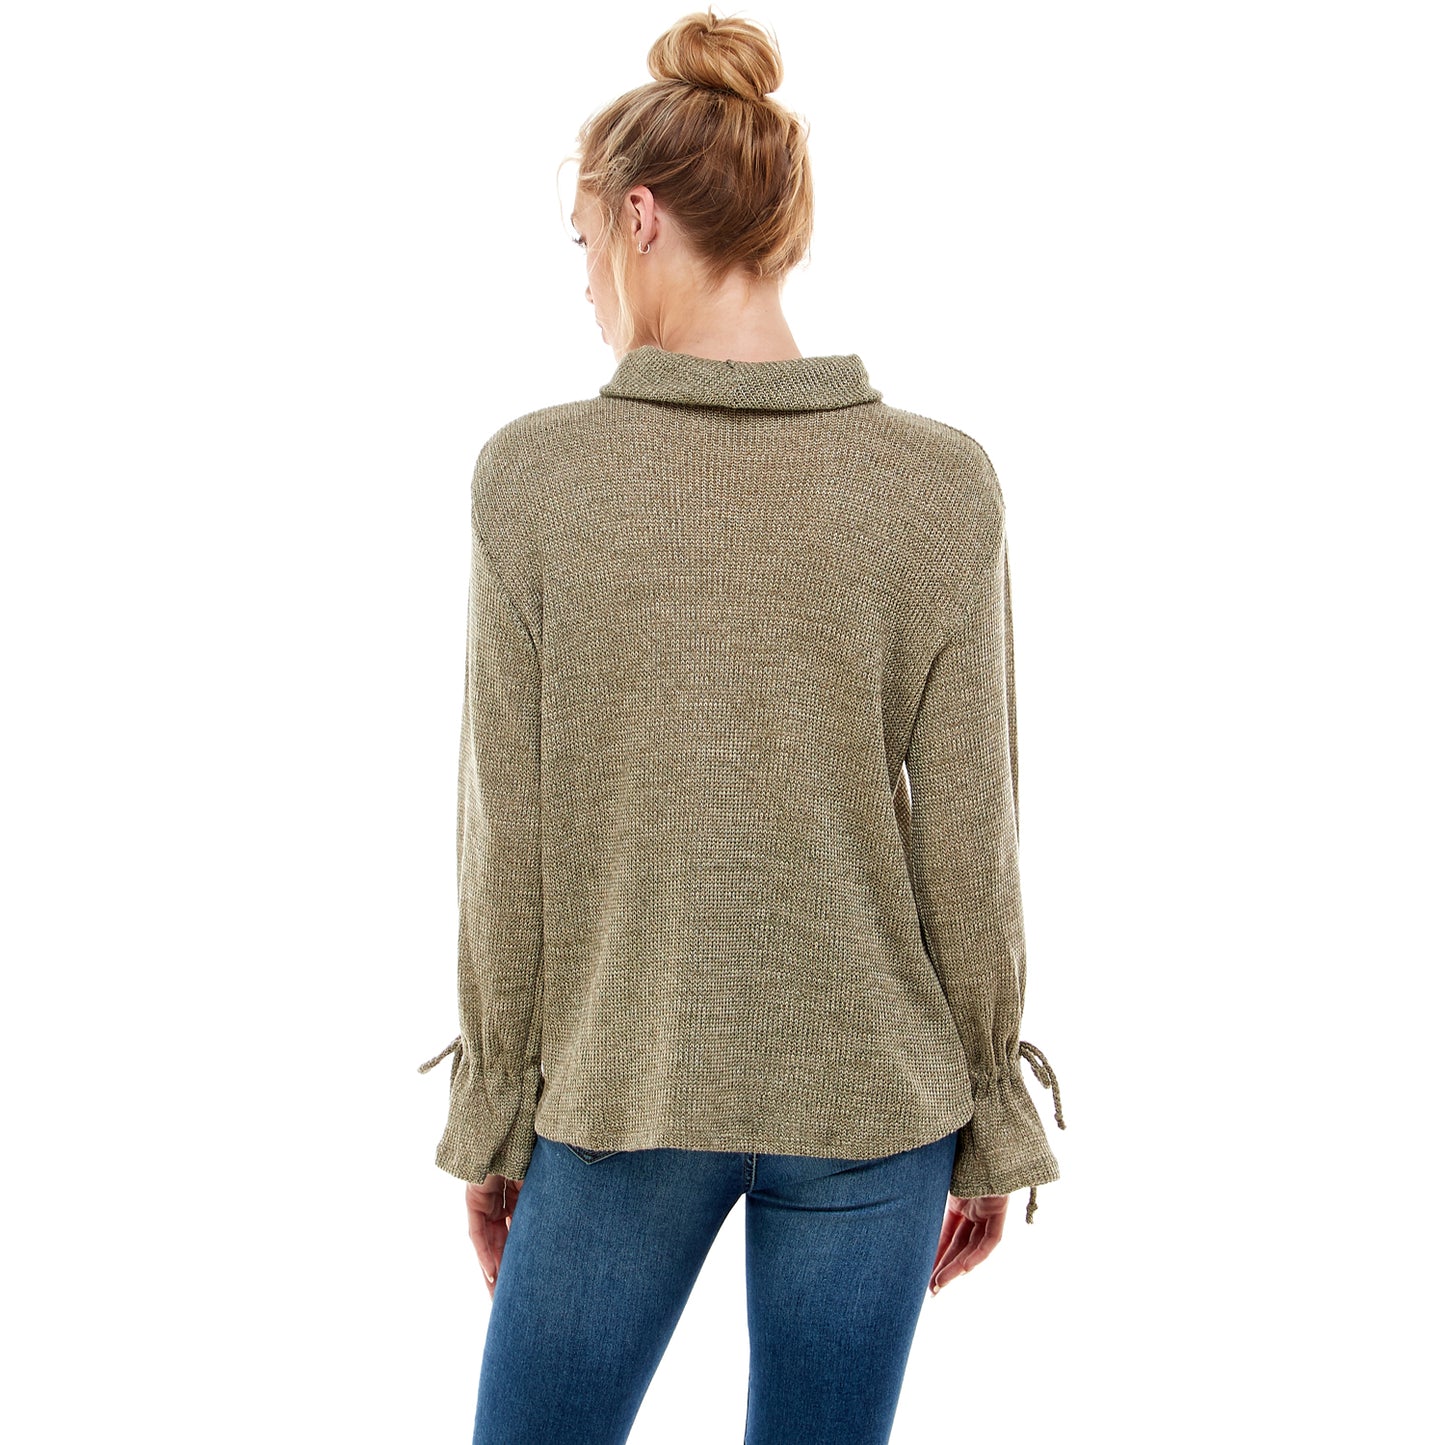 Cowl Neck Top With Tie Sleeves